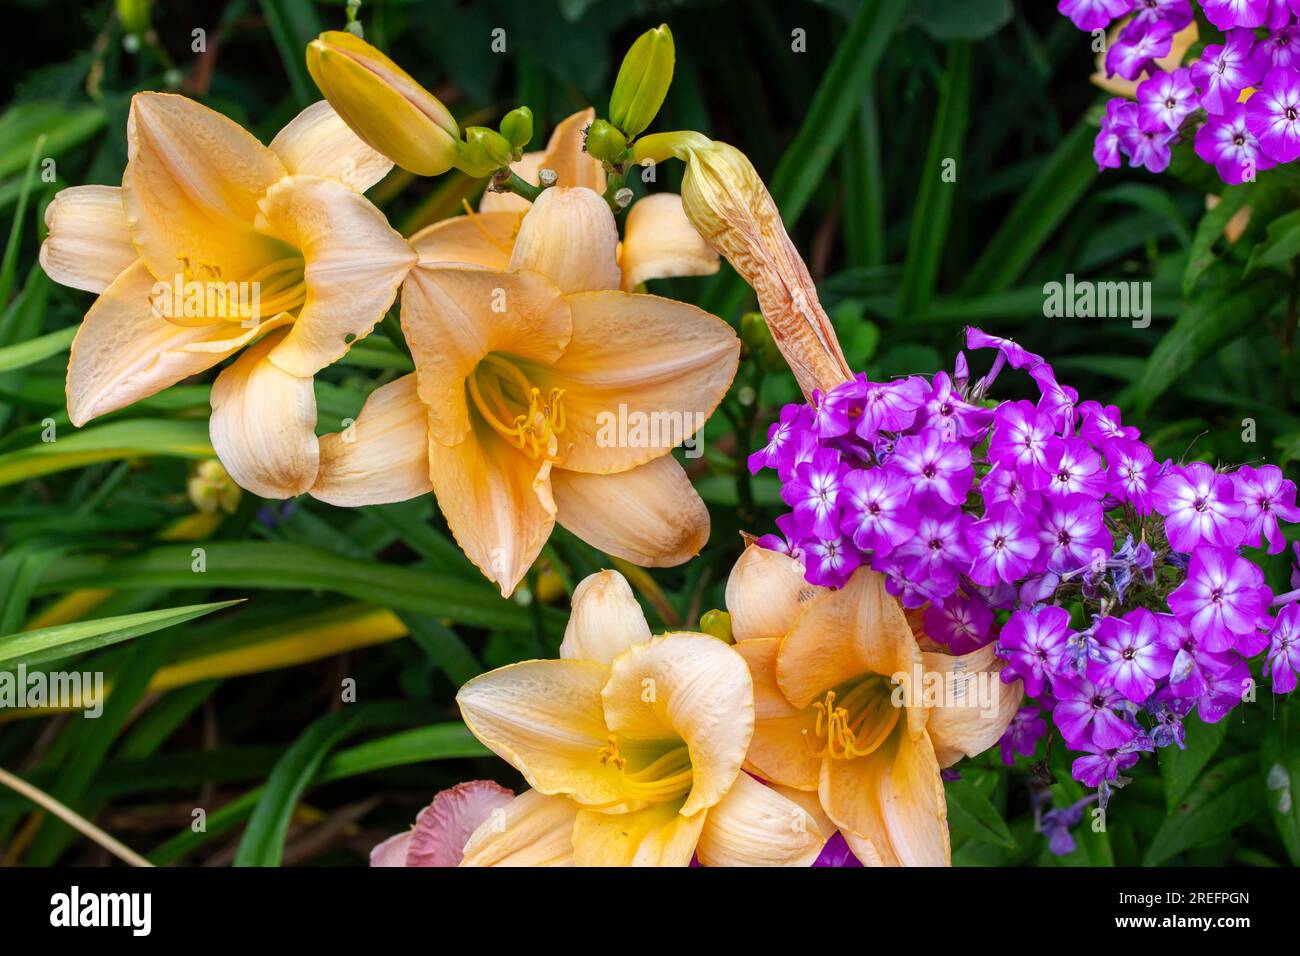 Close up view of beautiful salmon pink color day lily flowers (hemerocallis) in a bright sunny garden Stock Photo